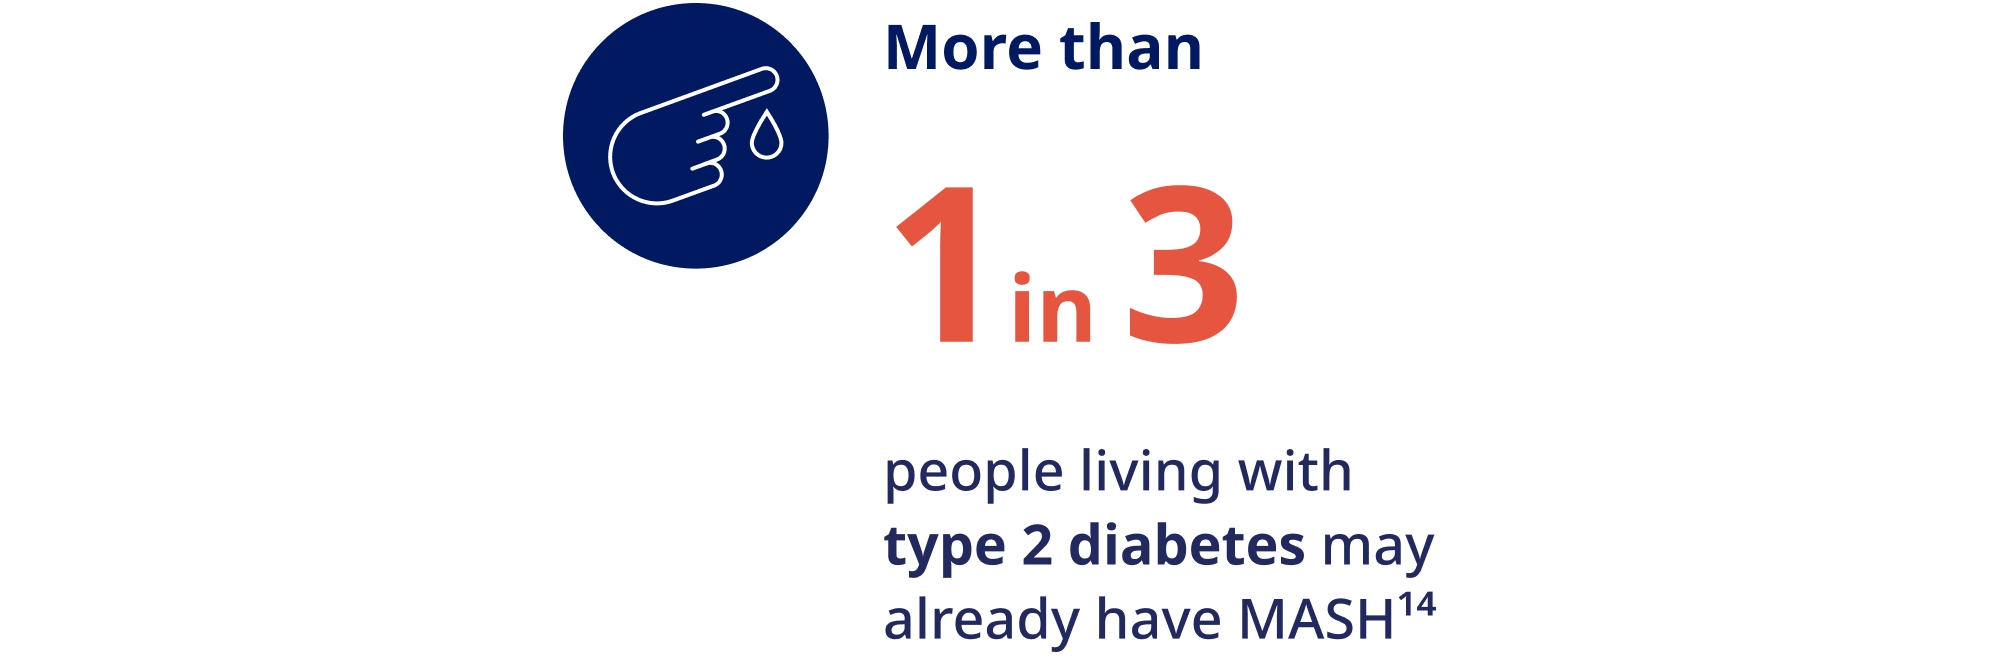 more than 1 in 3 people living with type 2 diabetes